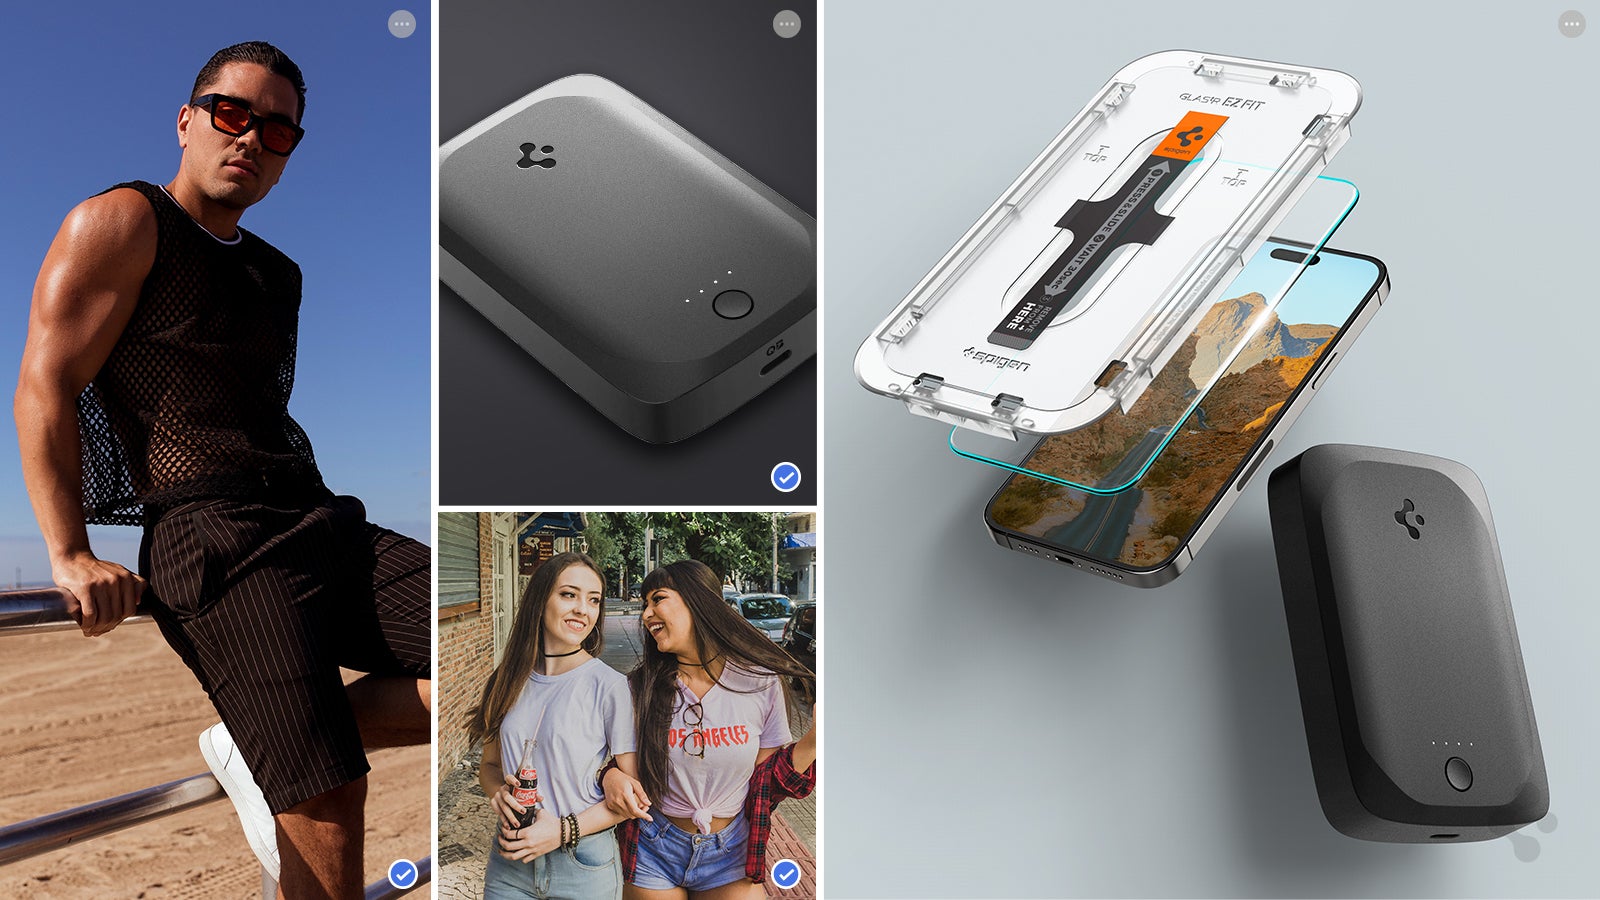 (Source - Spigen) Keep it clean, charge it up - The best accessories for your Apple Life: Spigen's cases, stands, and batteries